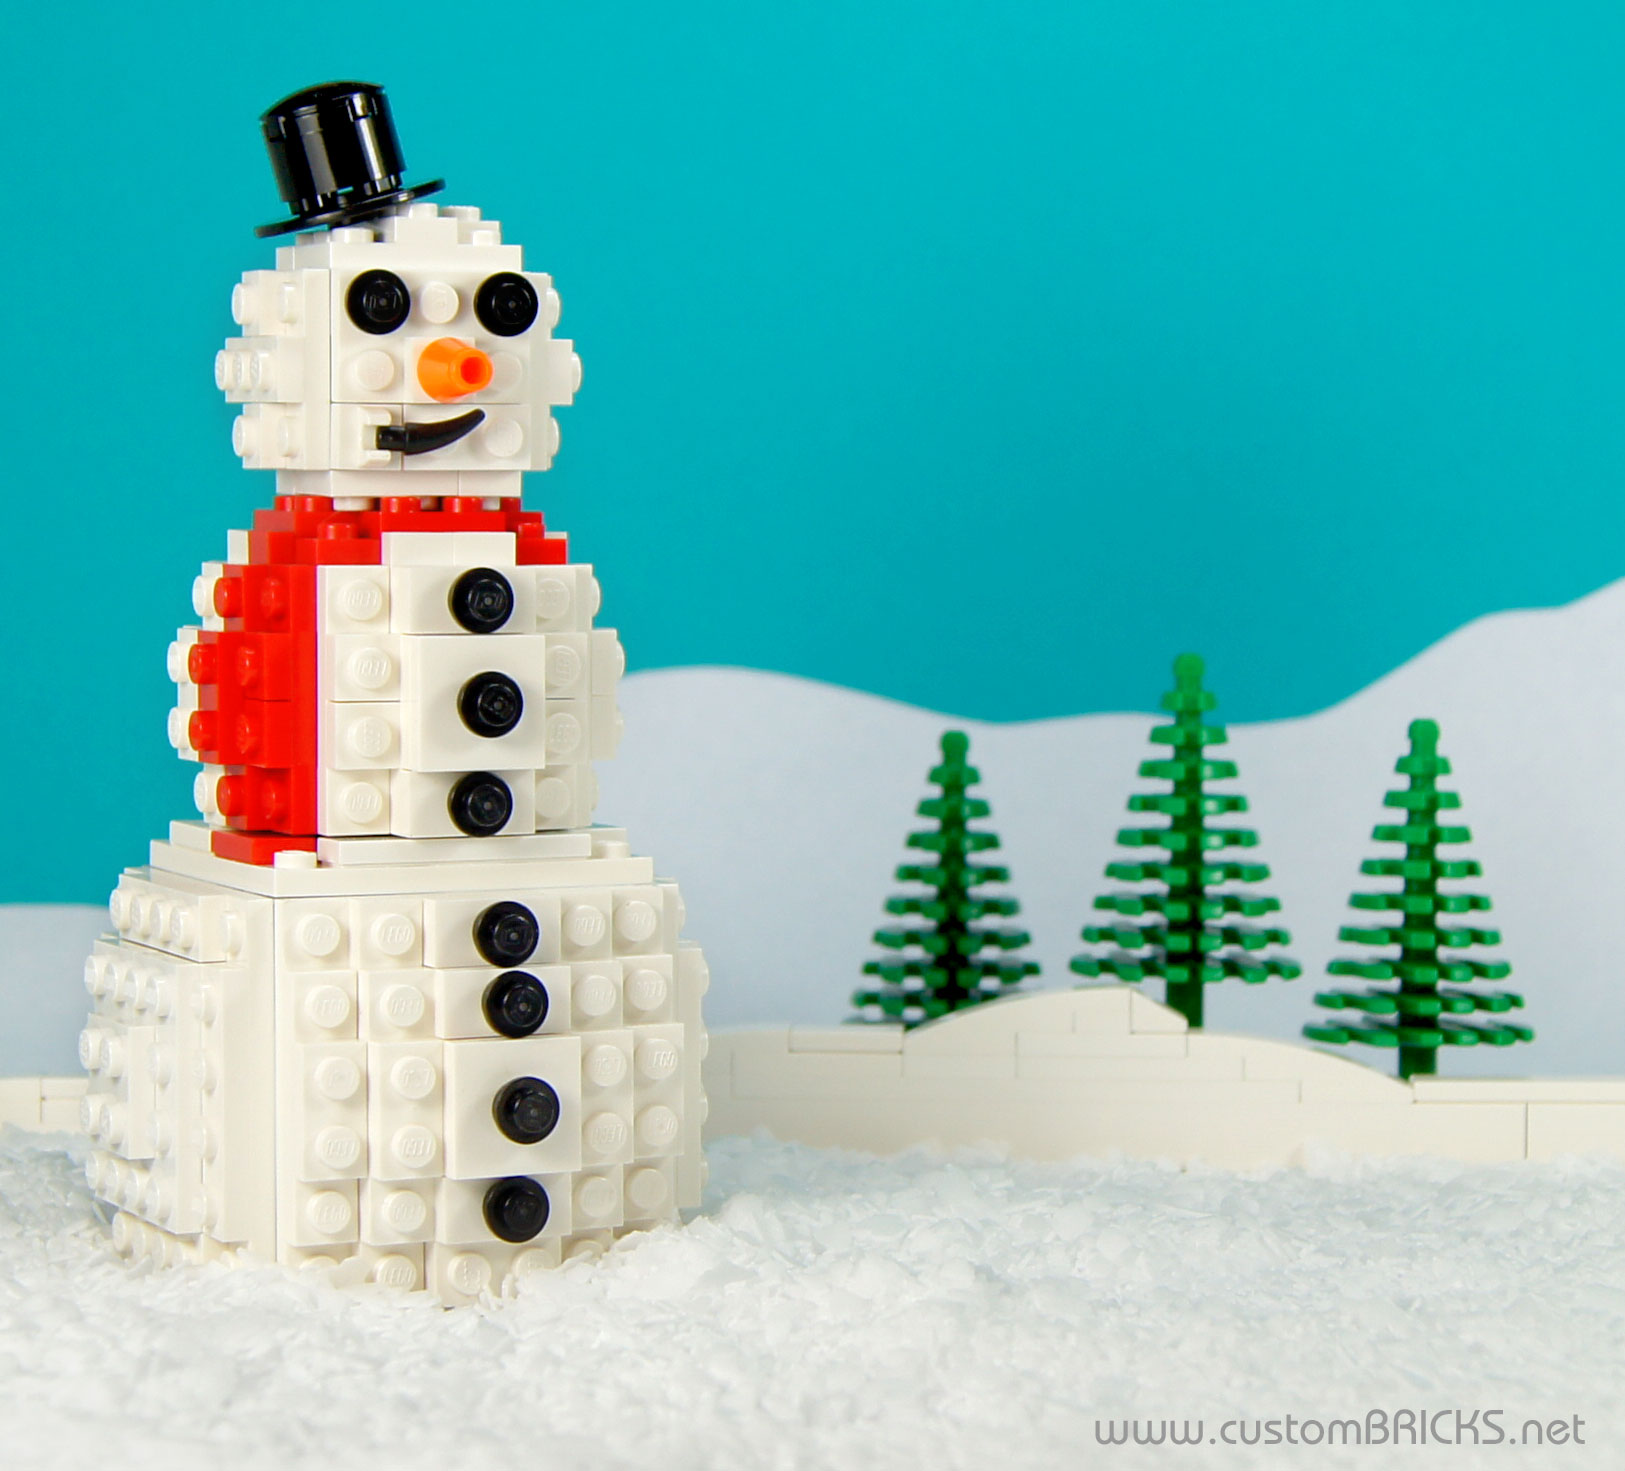 Wallpaper, winter, LEGO, snowman, scarf, Christmas, Toy, holiday, carrot, tree, had, christmas ornament 1625x1471